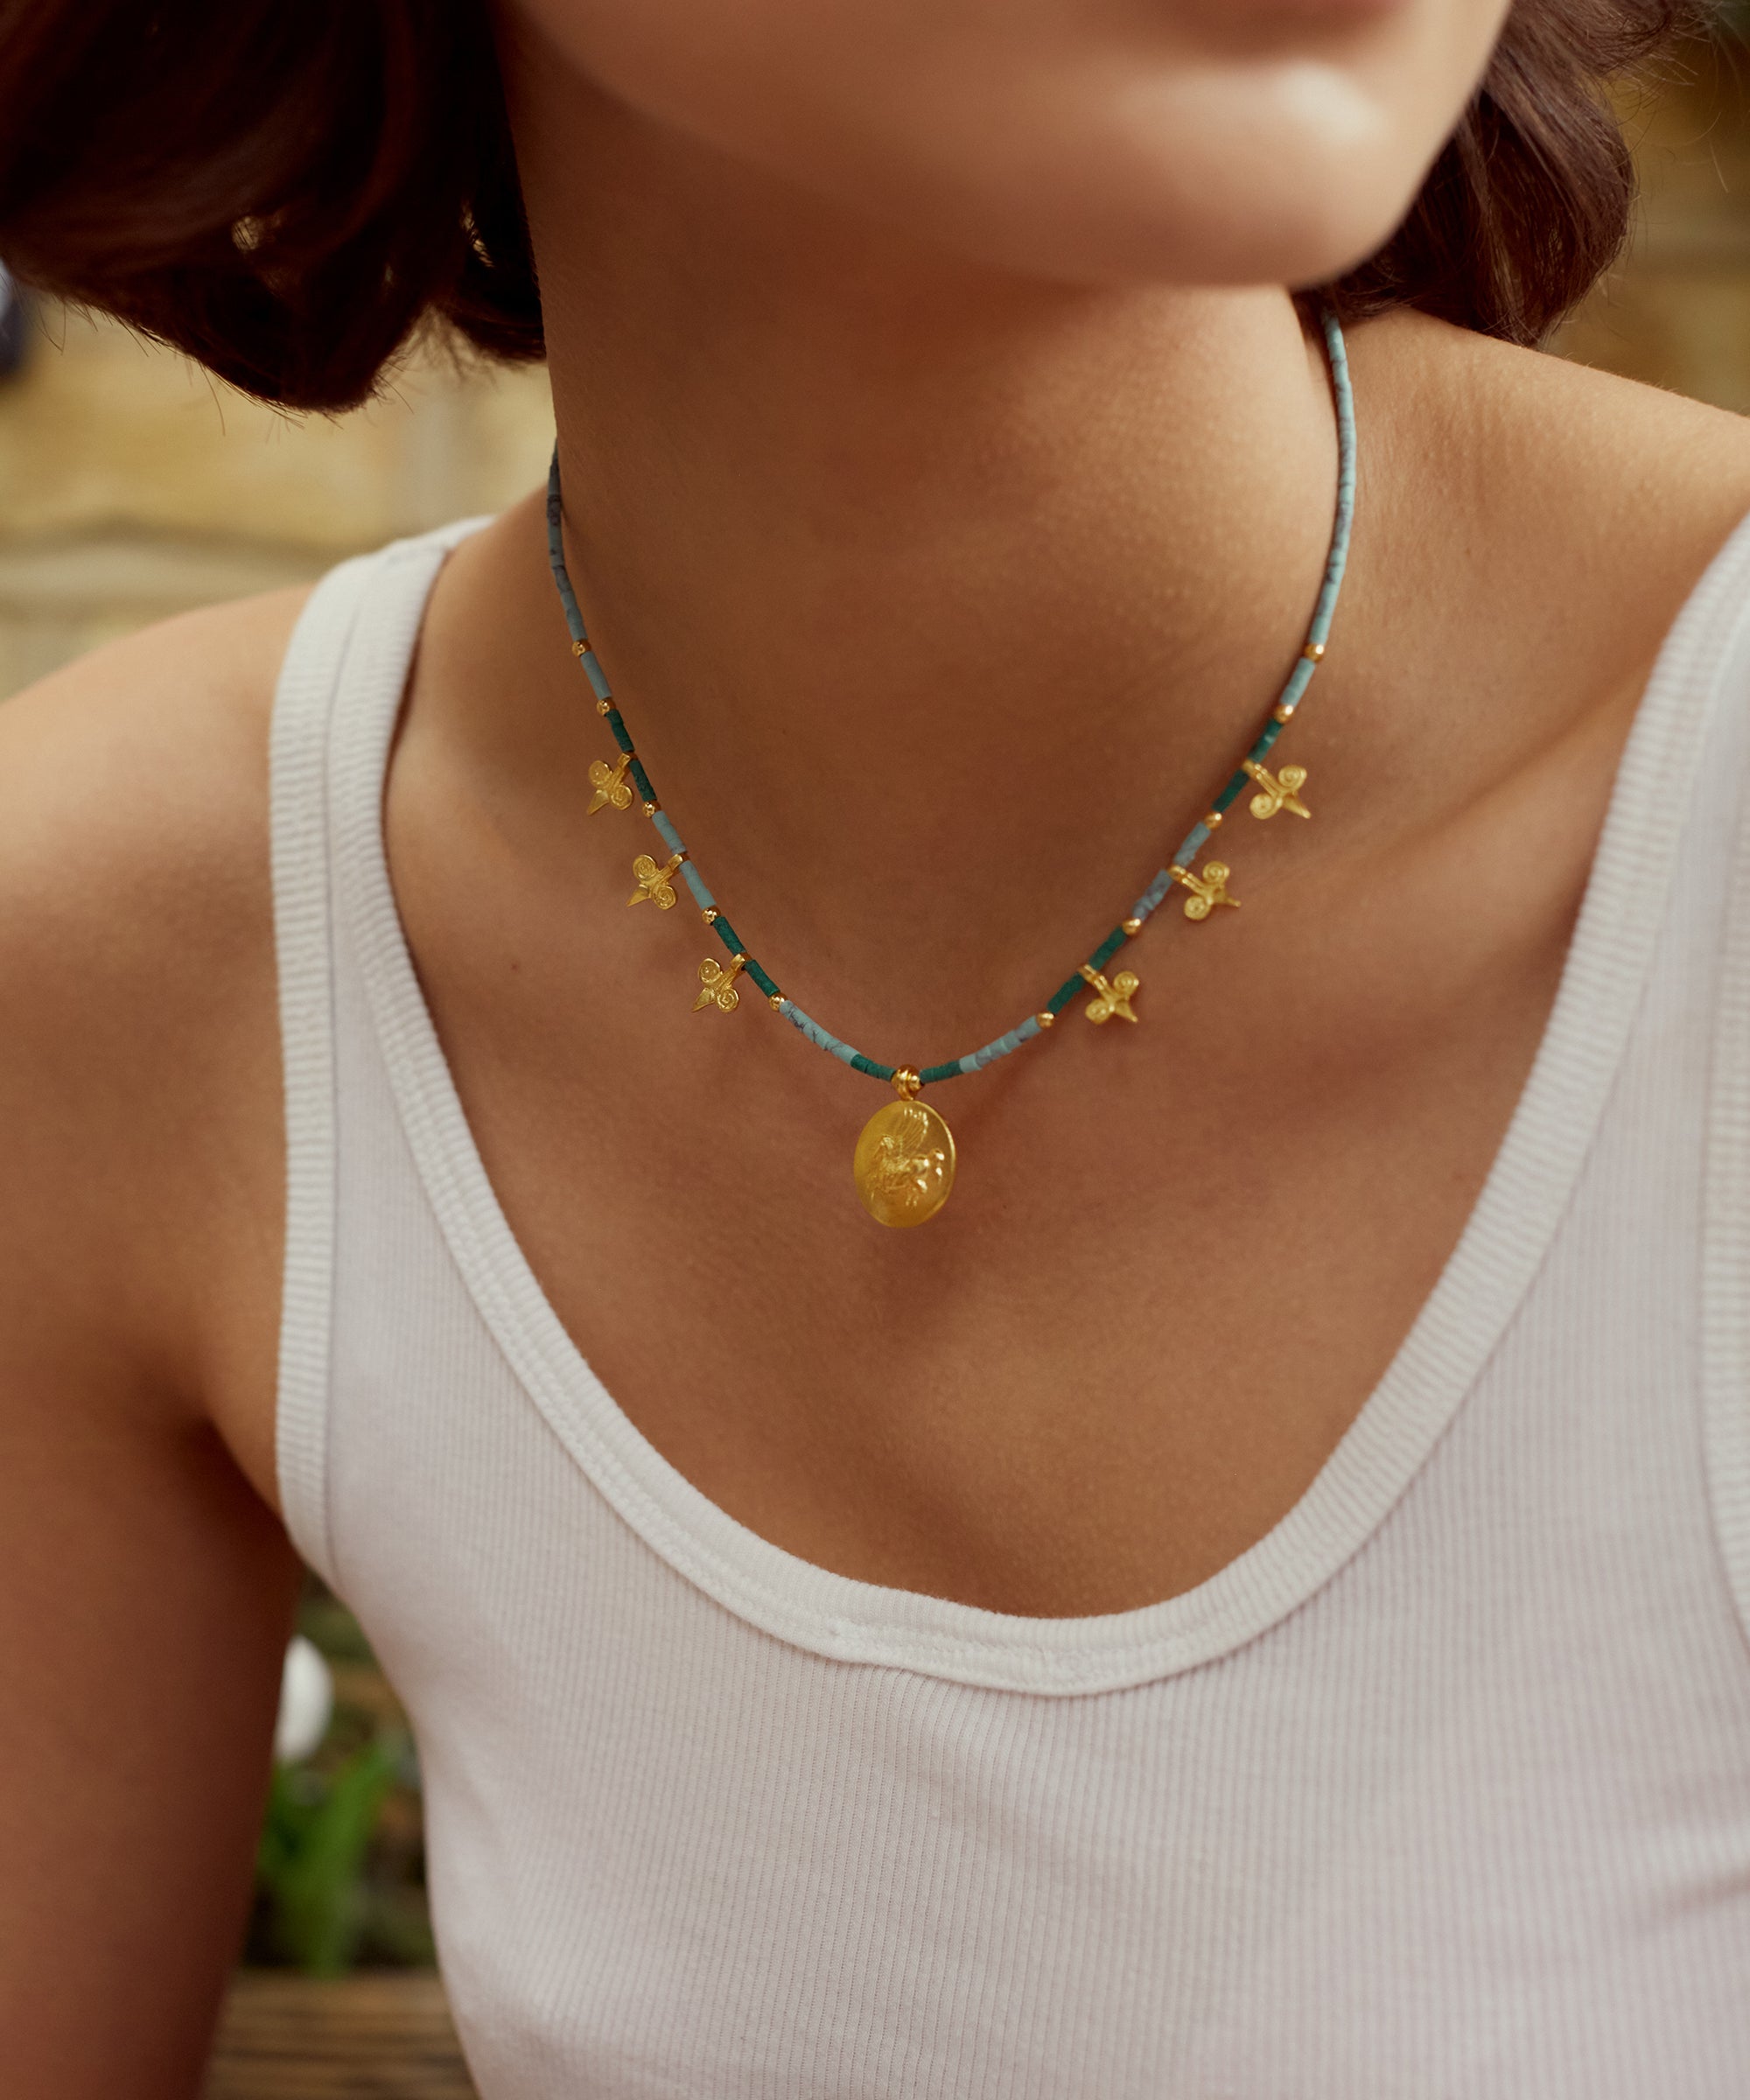 Pegasus Beaded Pendant Necklace | Sustainable Jewellery by Ottoman Hands